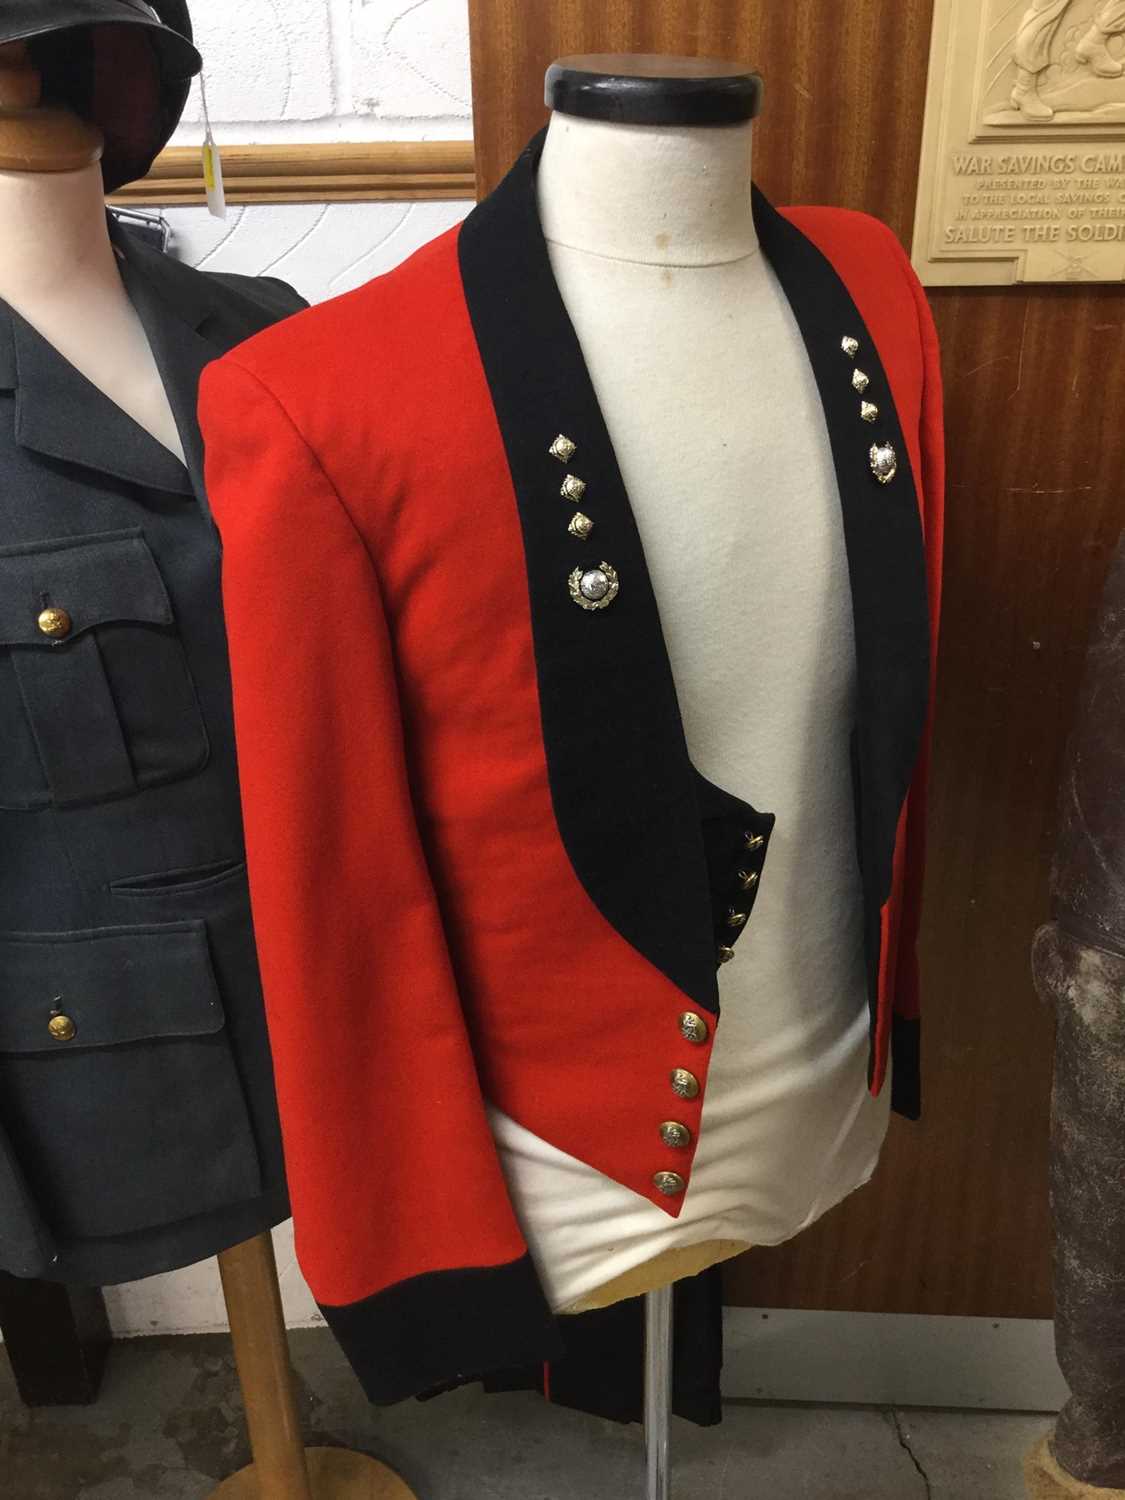 Lot 828 - 1960's Royal Marines Officers Mess dress uniform comprising jacket, waistcoat and trousers, label to interior named to 2Lt. C. J. Burgess. 16. 2. 67